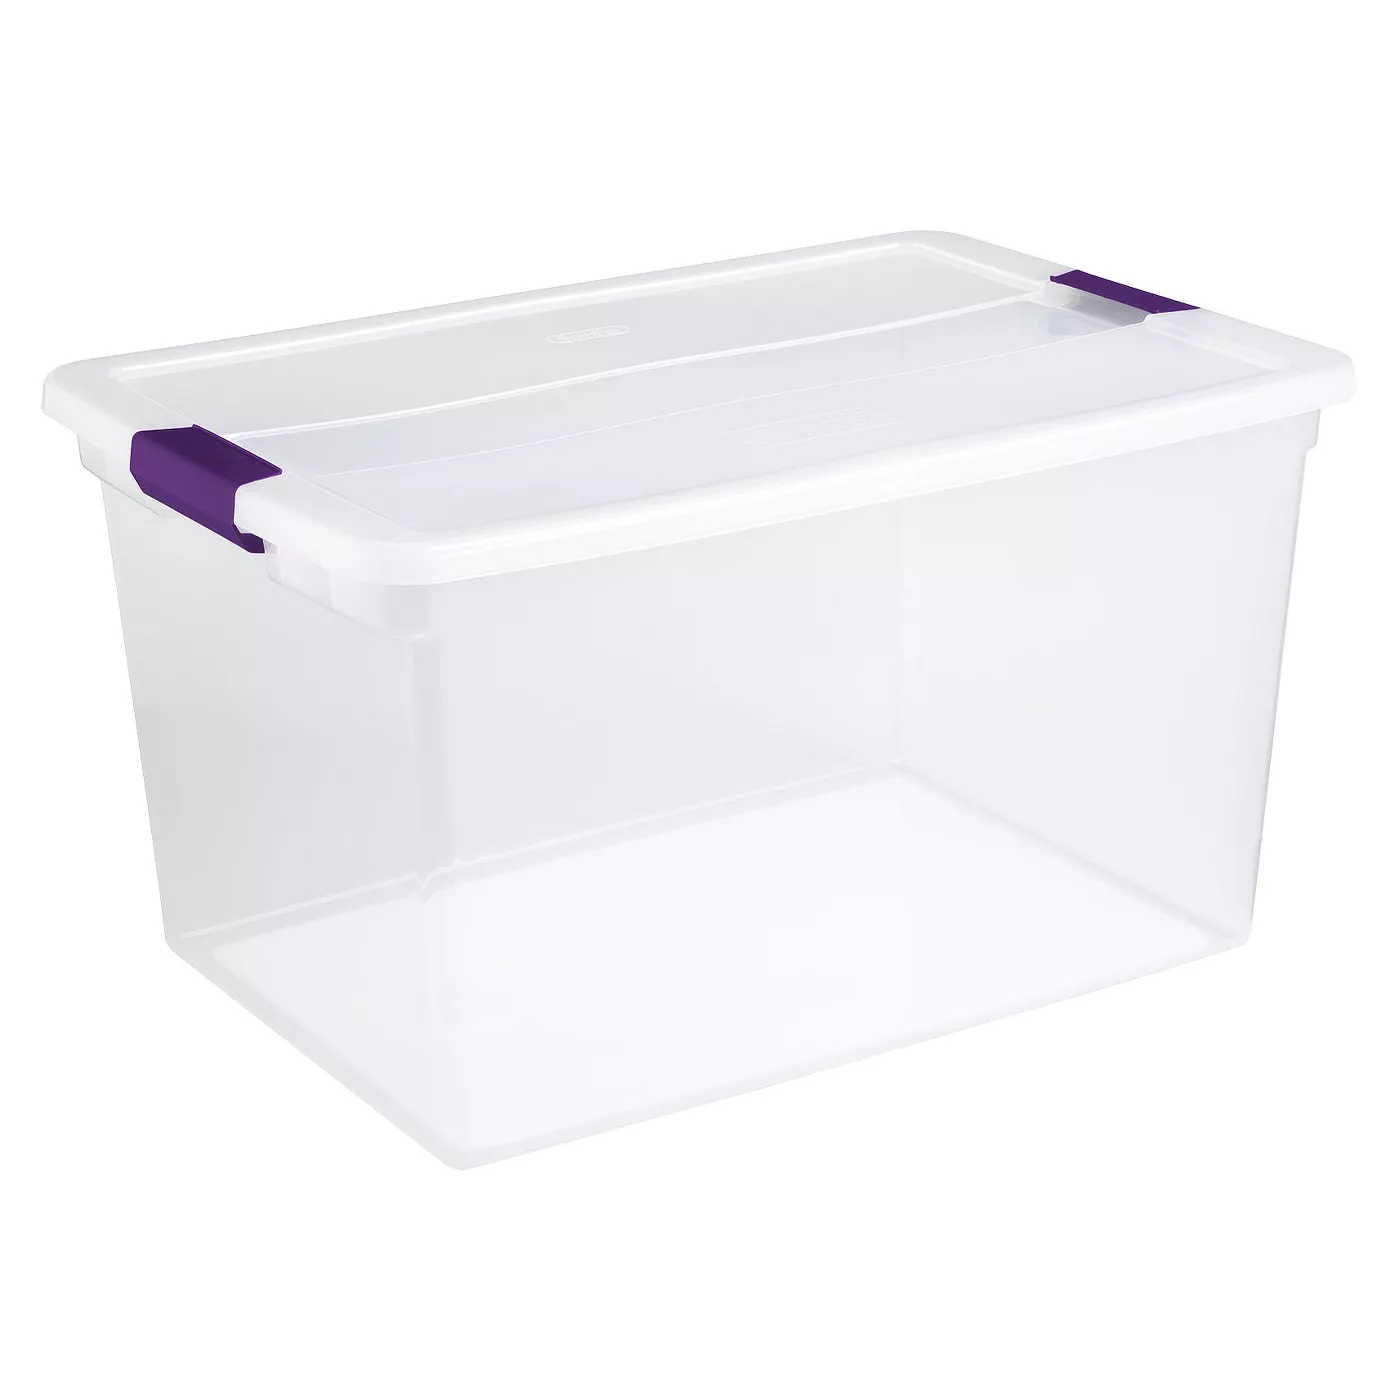 Sterilite 66 Qt ClearView Latch Box Clear with Purple Latches - image 1 of 3